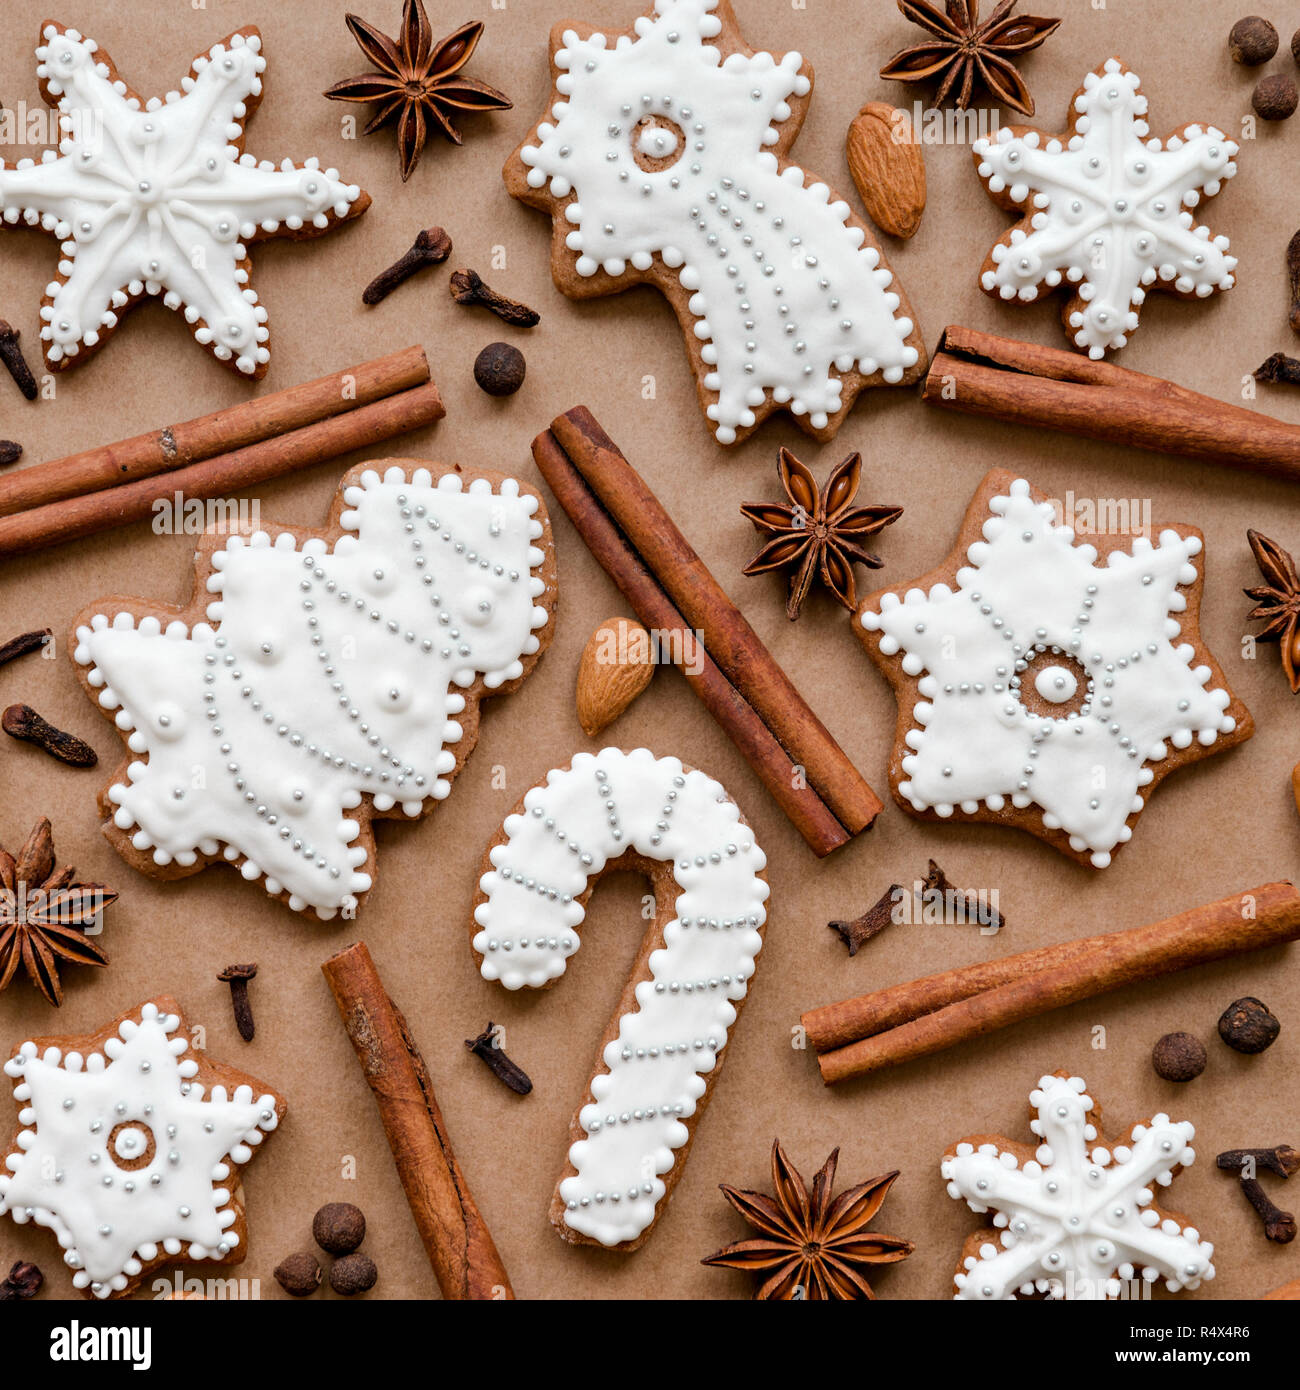 Christmas dekoration with spices and cookies in the shape of snowflakes on dark brown paper background. Top view. Stock Photo